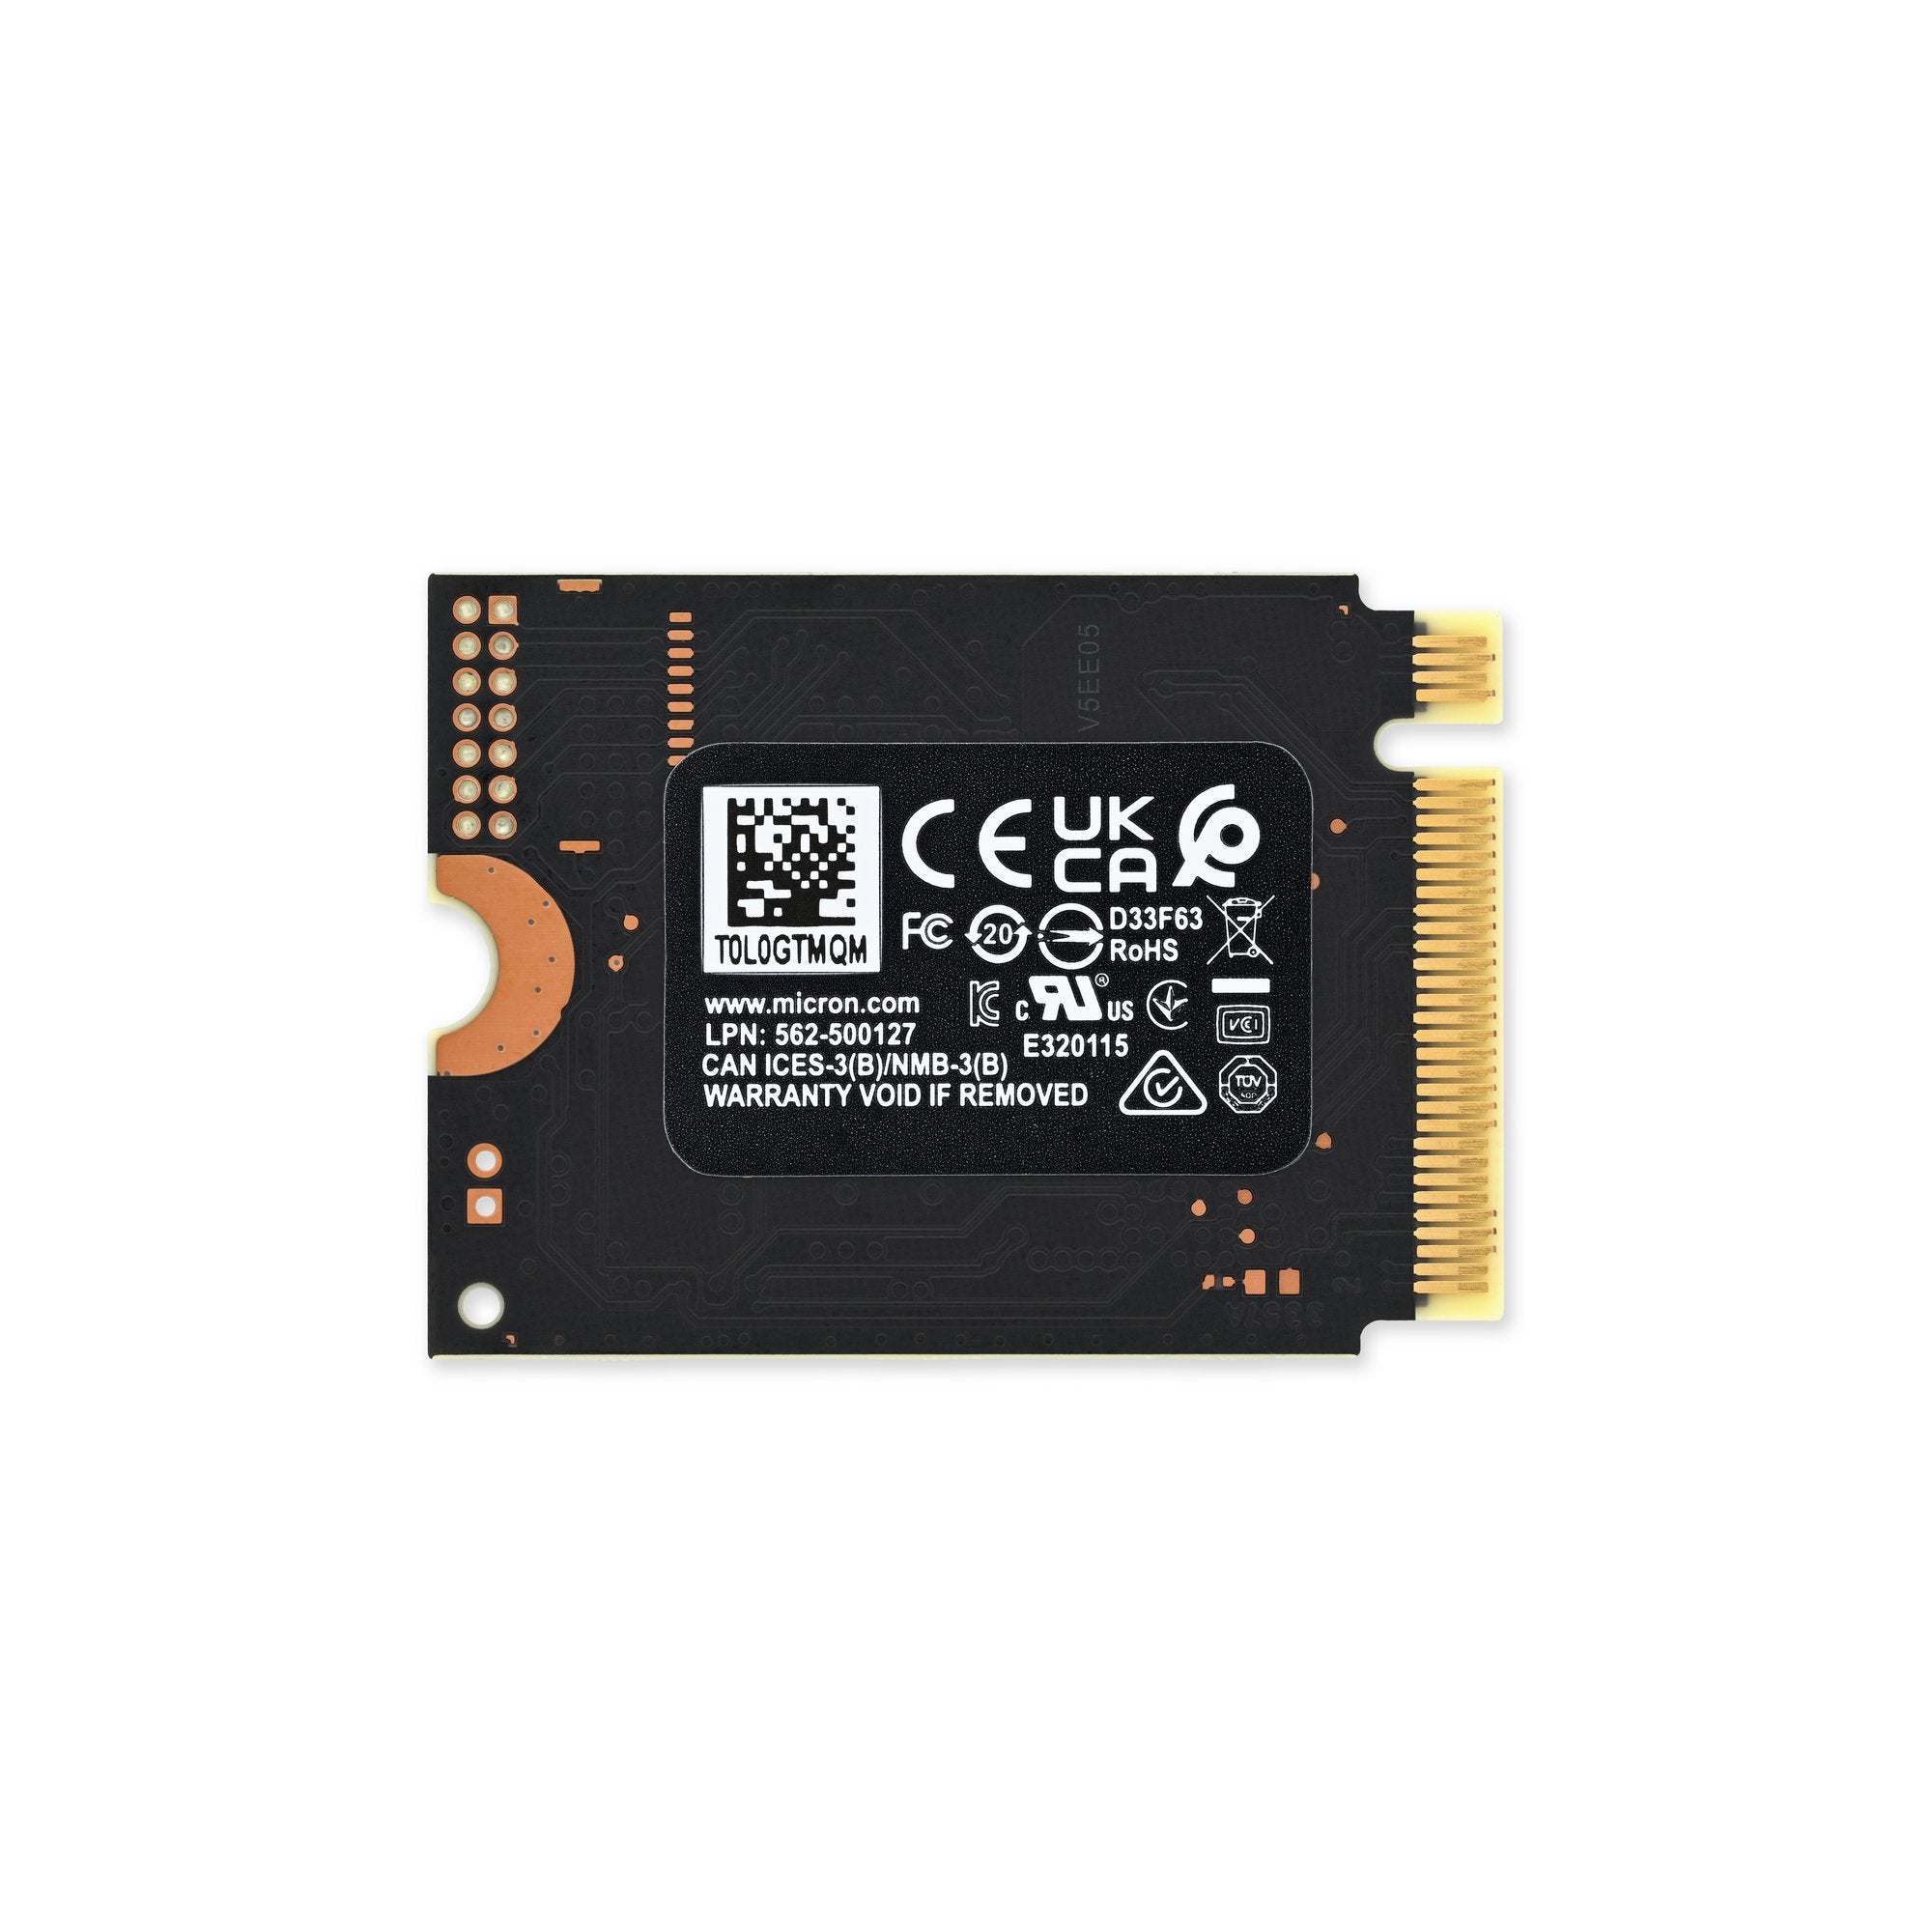 This 2TB Micron M.2 2230 SSD is perfect for your Steam Deck, and it's £150  from